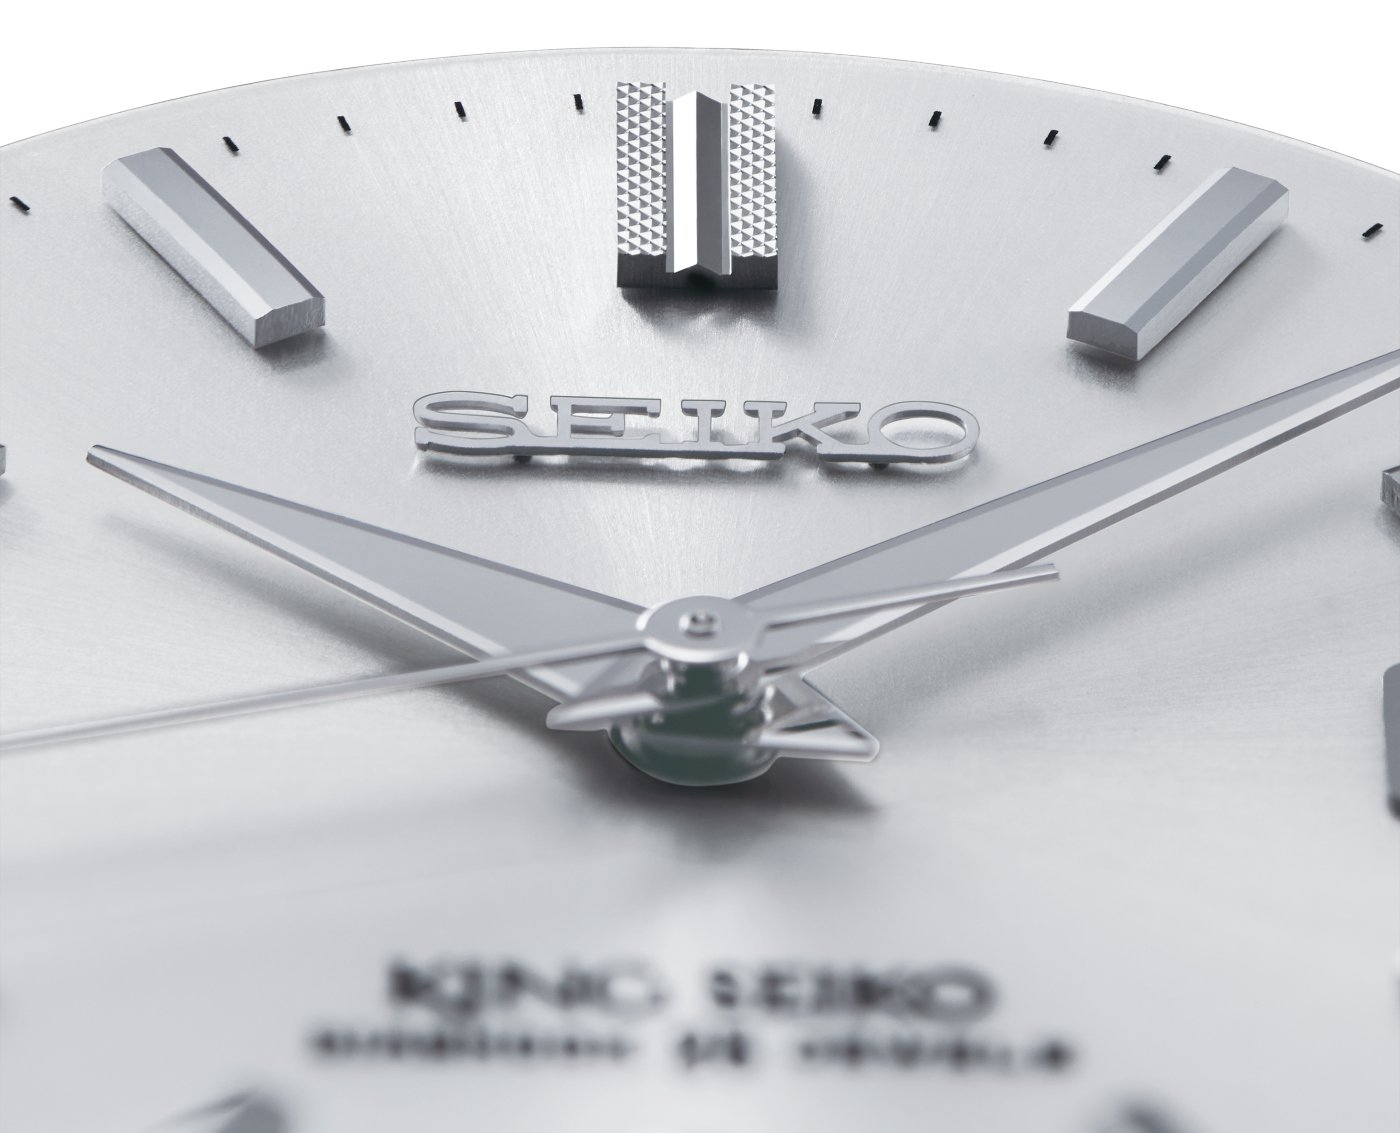 King Seiko: a 1965 classic is re-born!